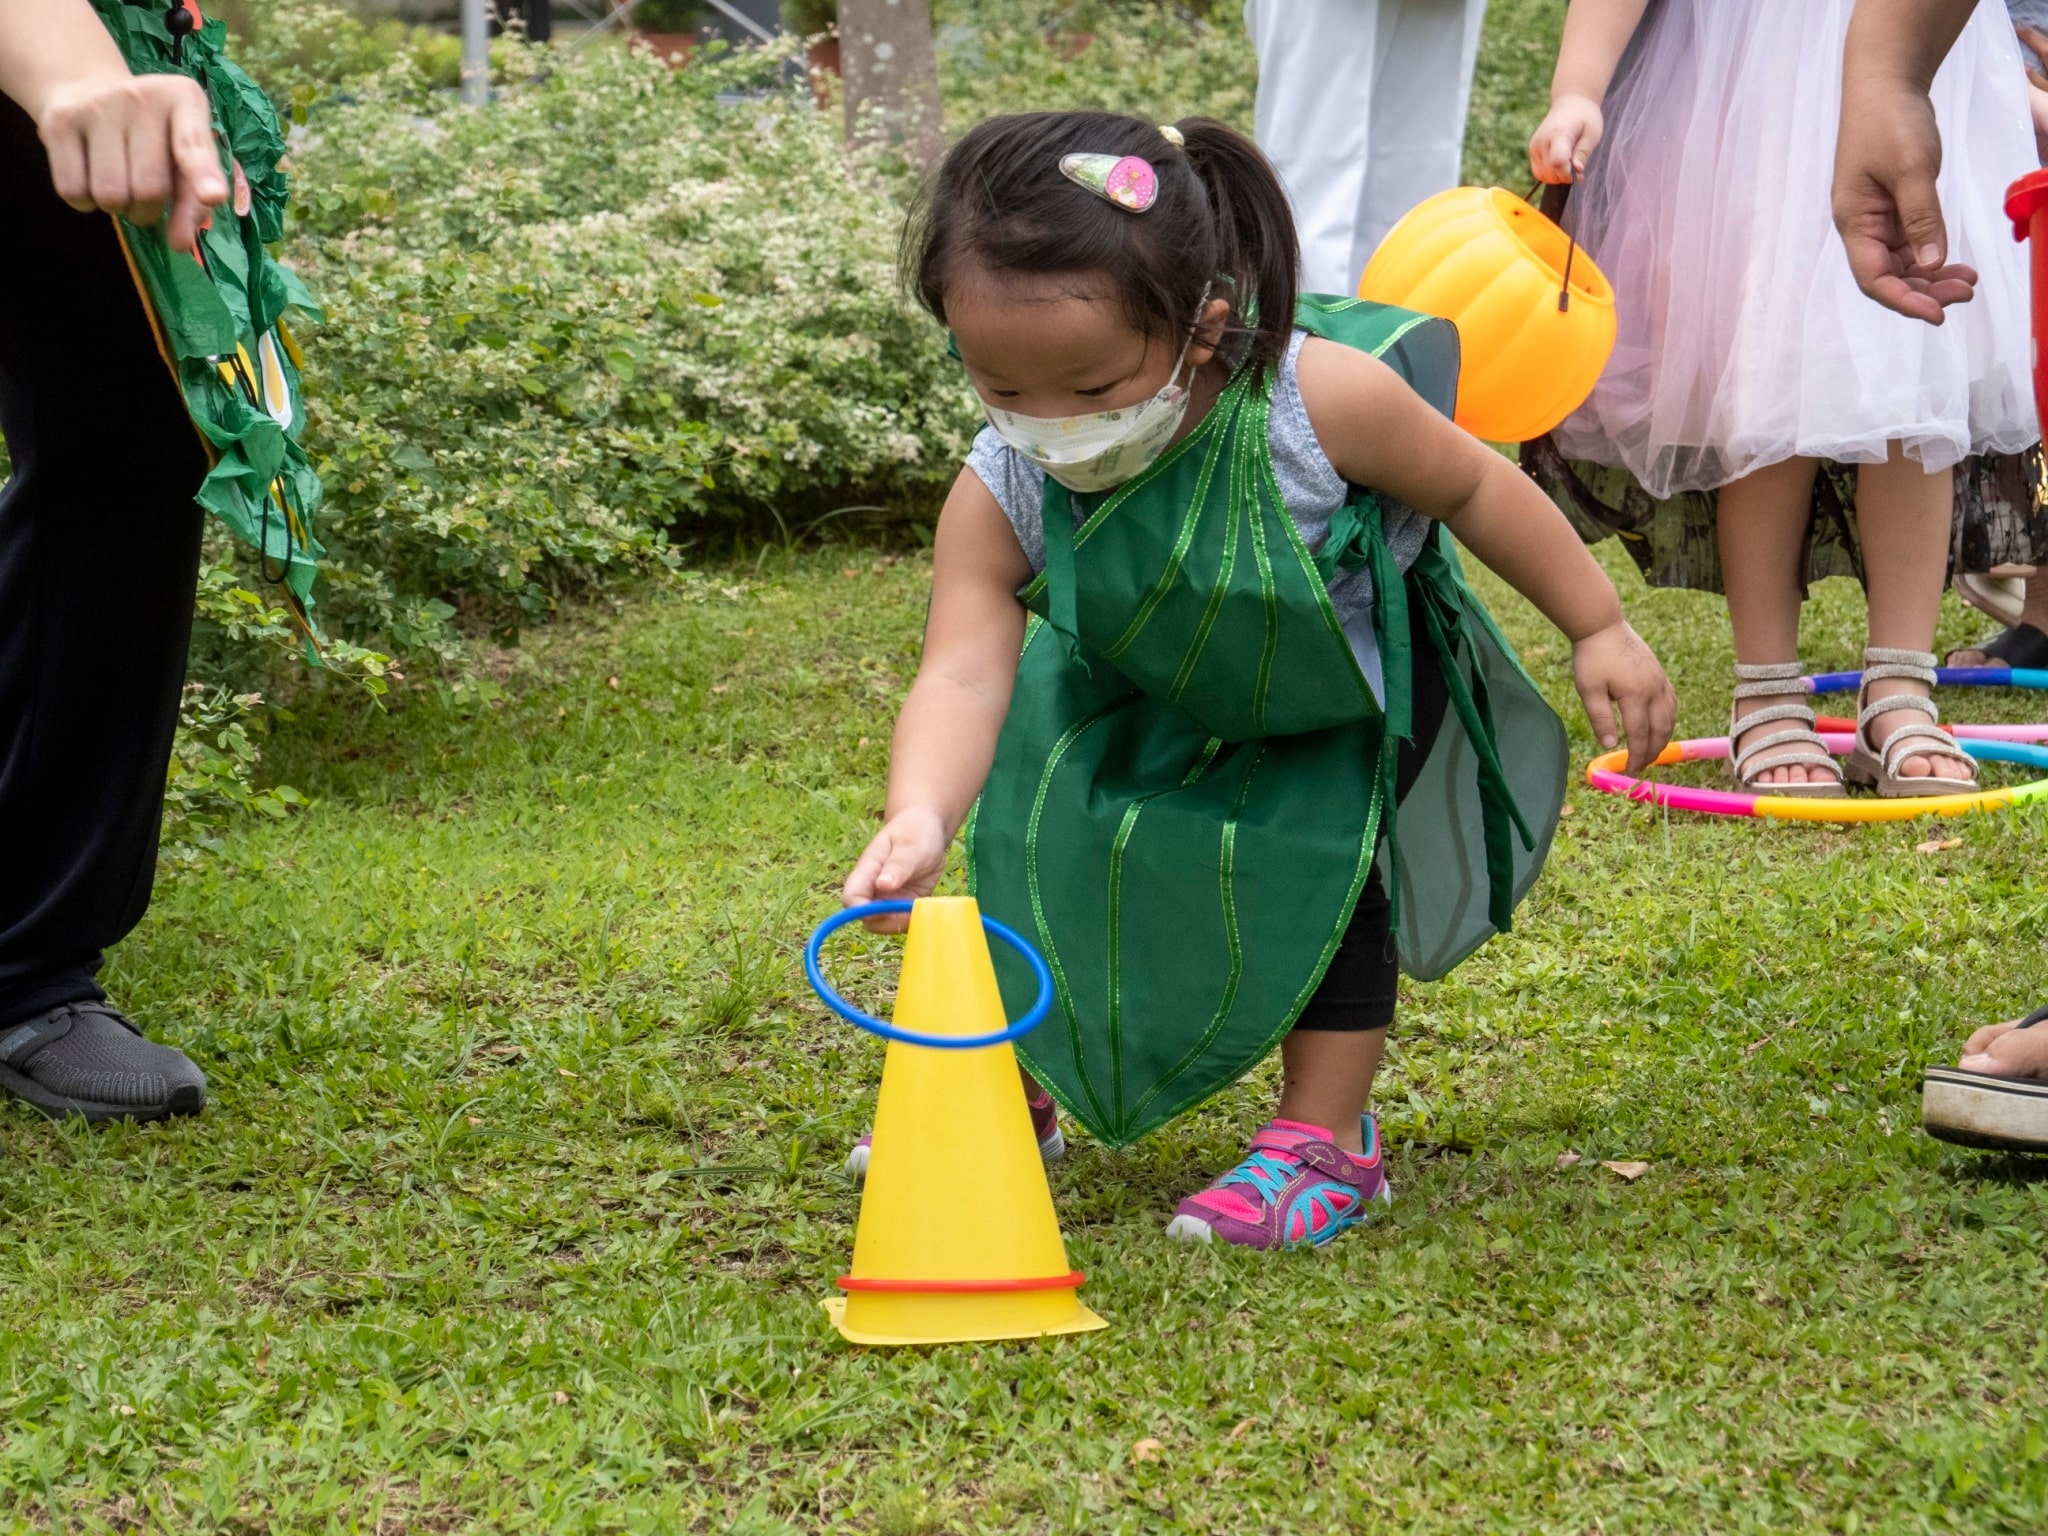 Students play a child-friendly obstacle course with guidance from parents and teachers. 【Photo by Matt Serrano】